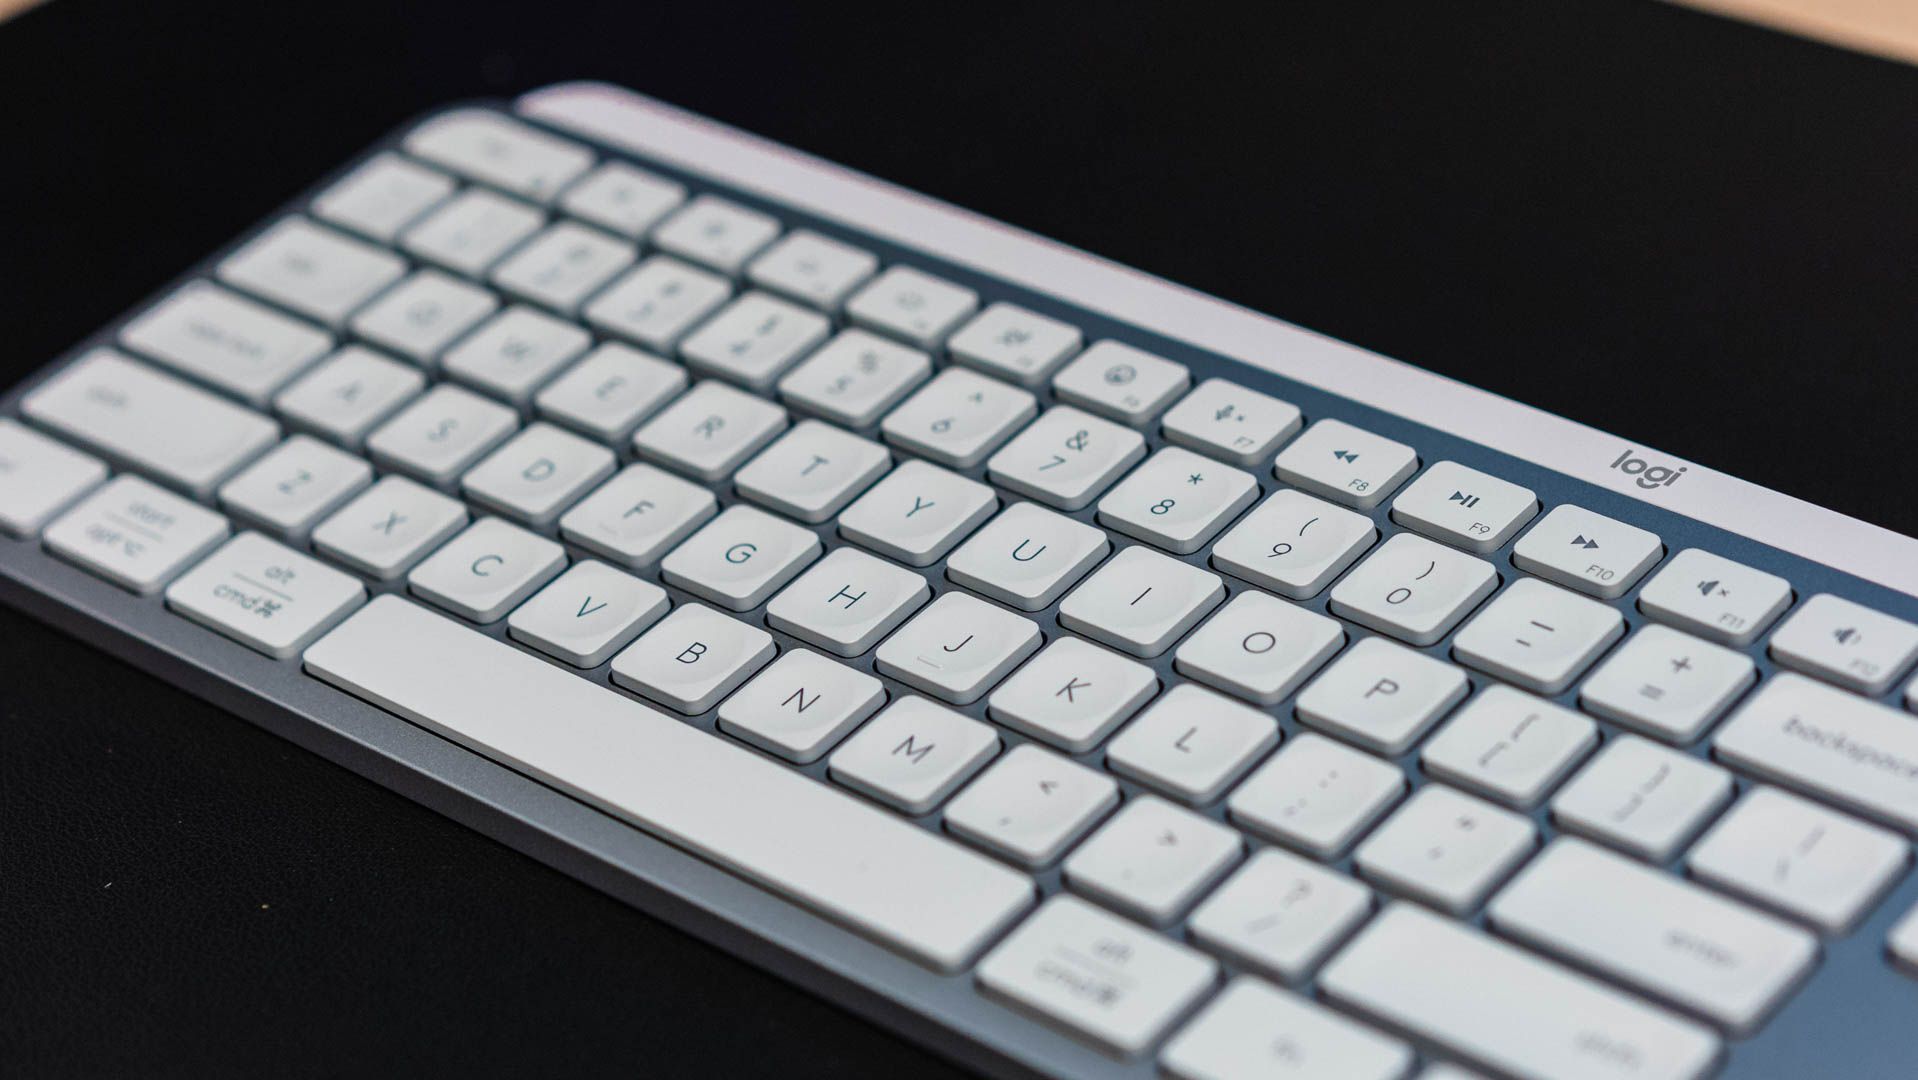 A close-up view of the Logitech MX Keys S keyboard.